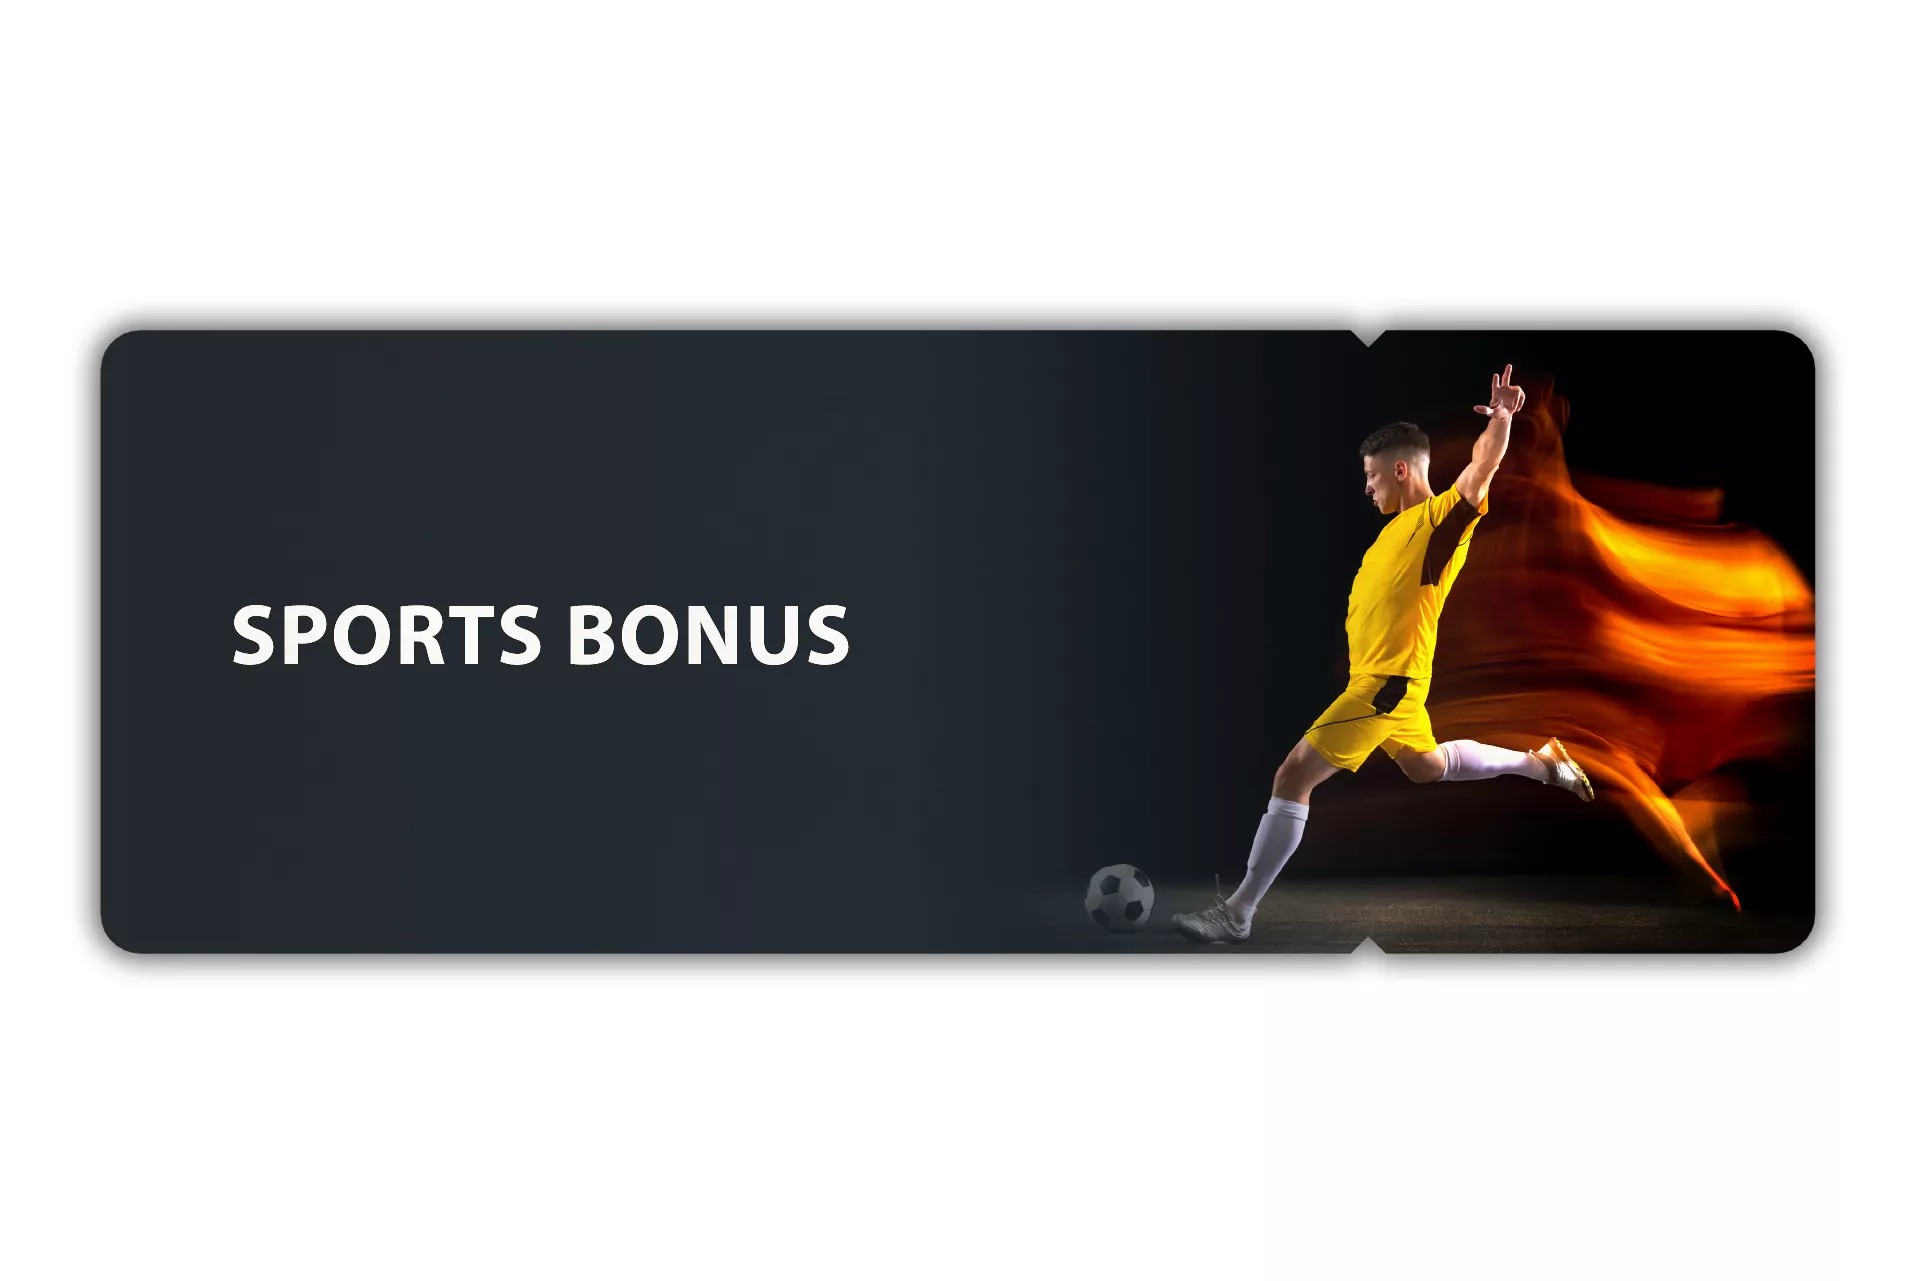 For sports bettors, there are a few special bonuses offers available at Melbet.